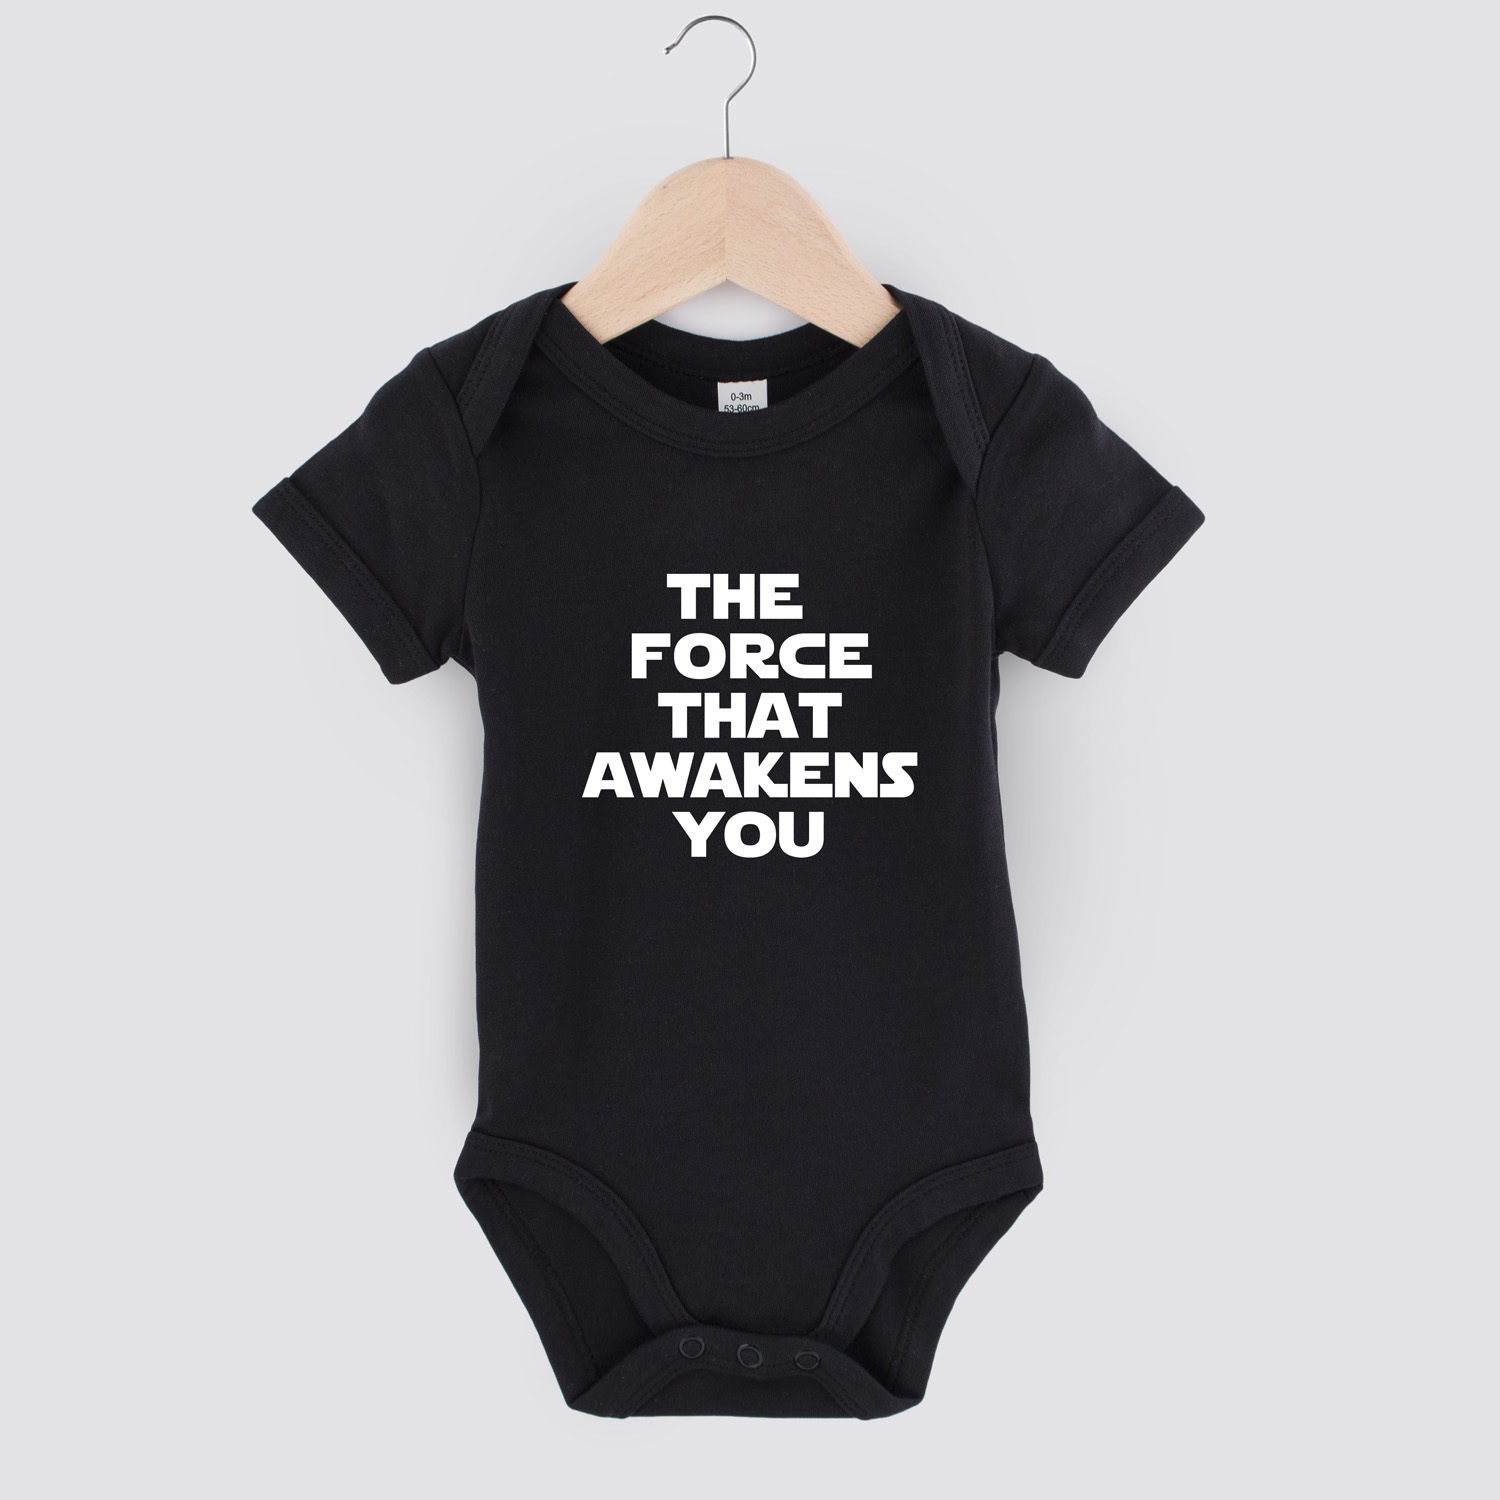 The force that awakens you | Baby romper | my fabulous life.